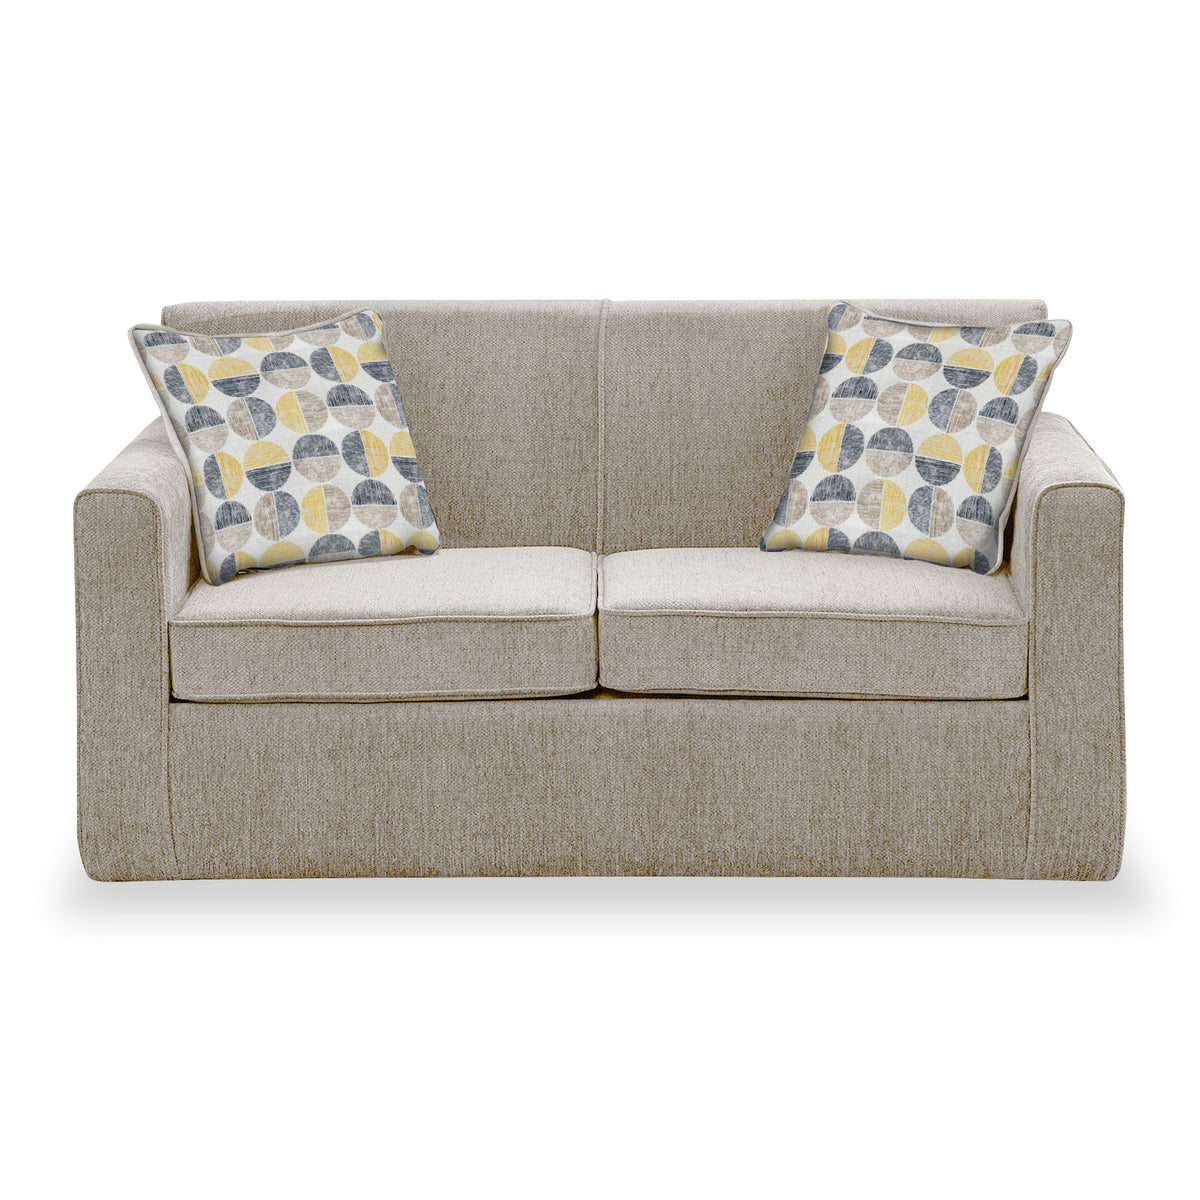 Welton Oatmeal Soft Weave 2 Seater Sofa Bed with Refus Beige 